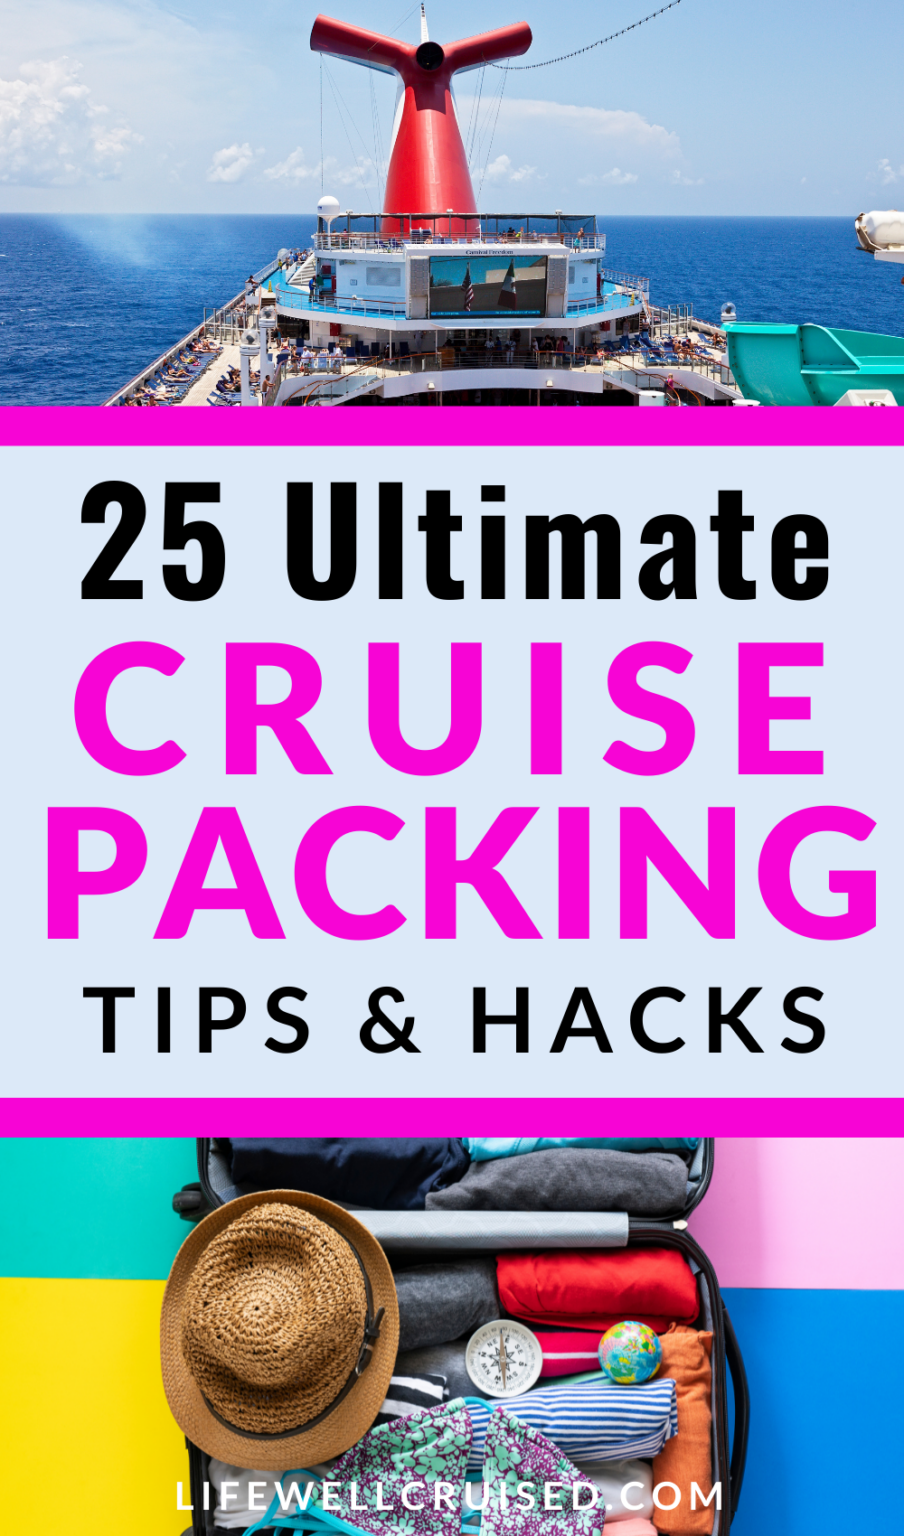 cruise tips for packing